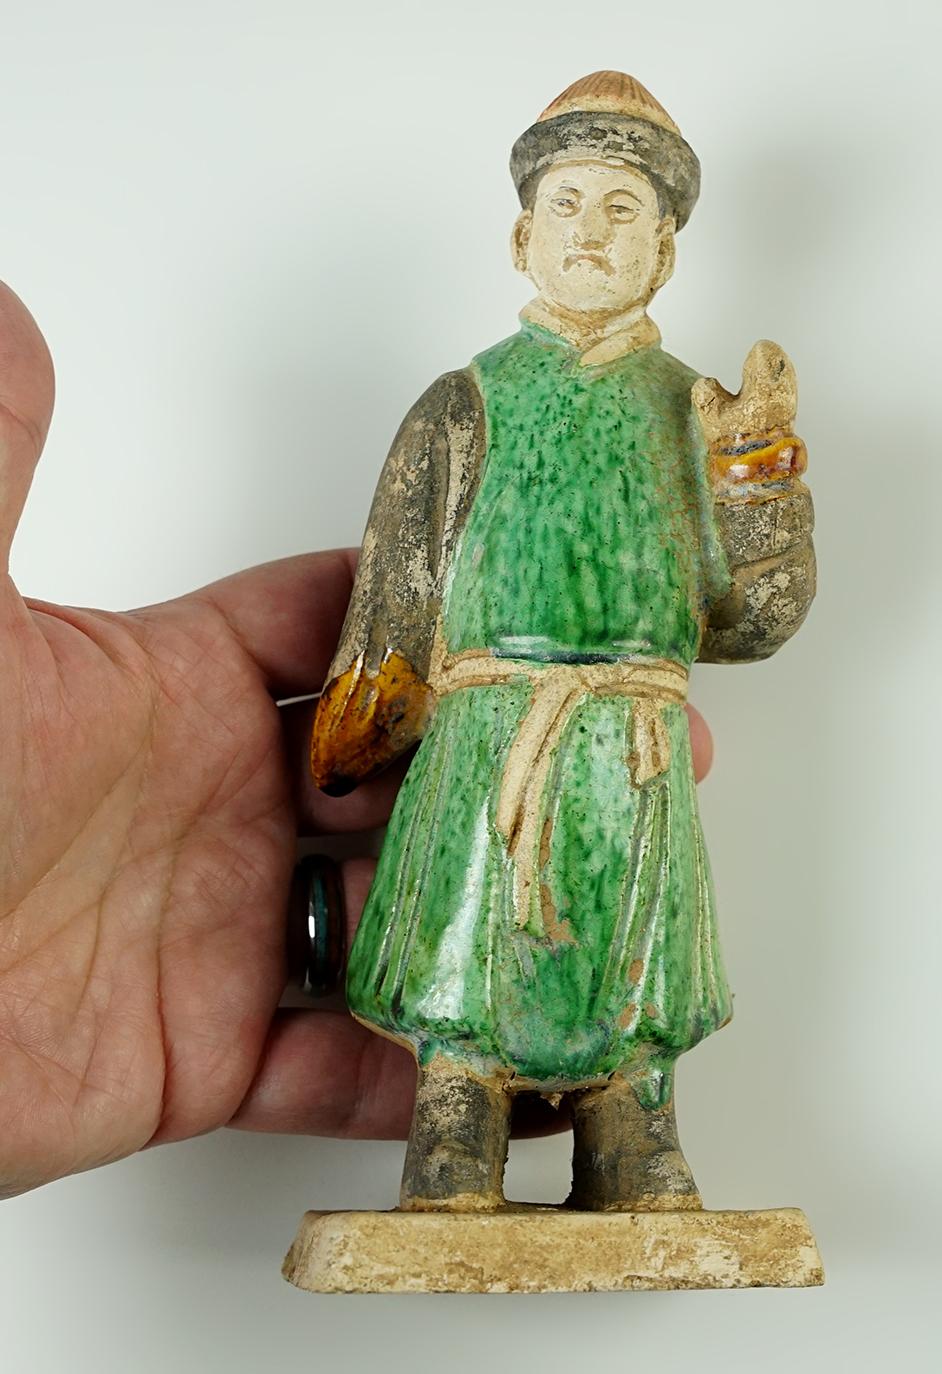 8 " tall Chinese male figure from the Tang Dynasty, cira A.D 618- 907. In excellent condition.